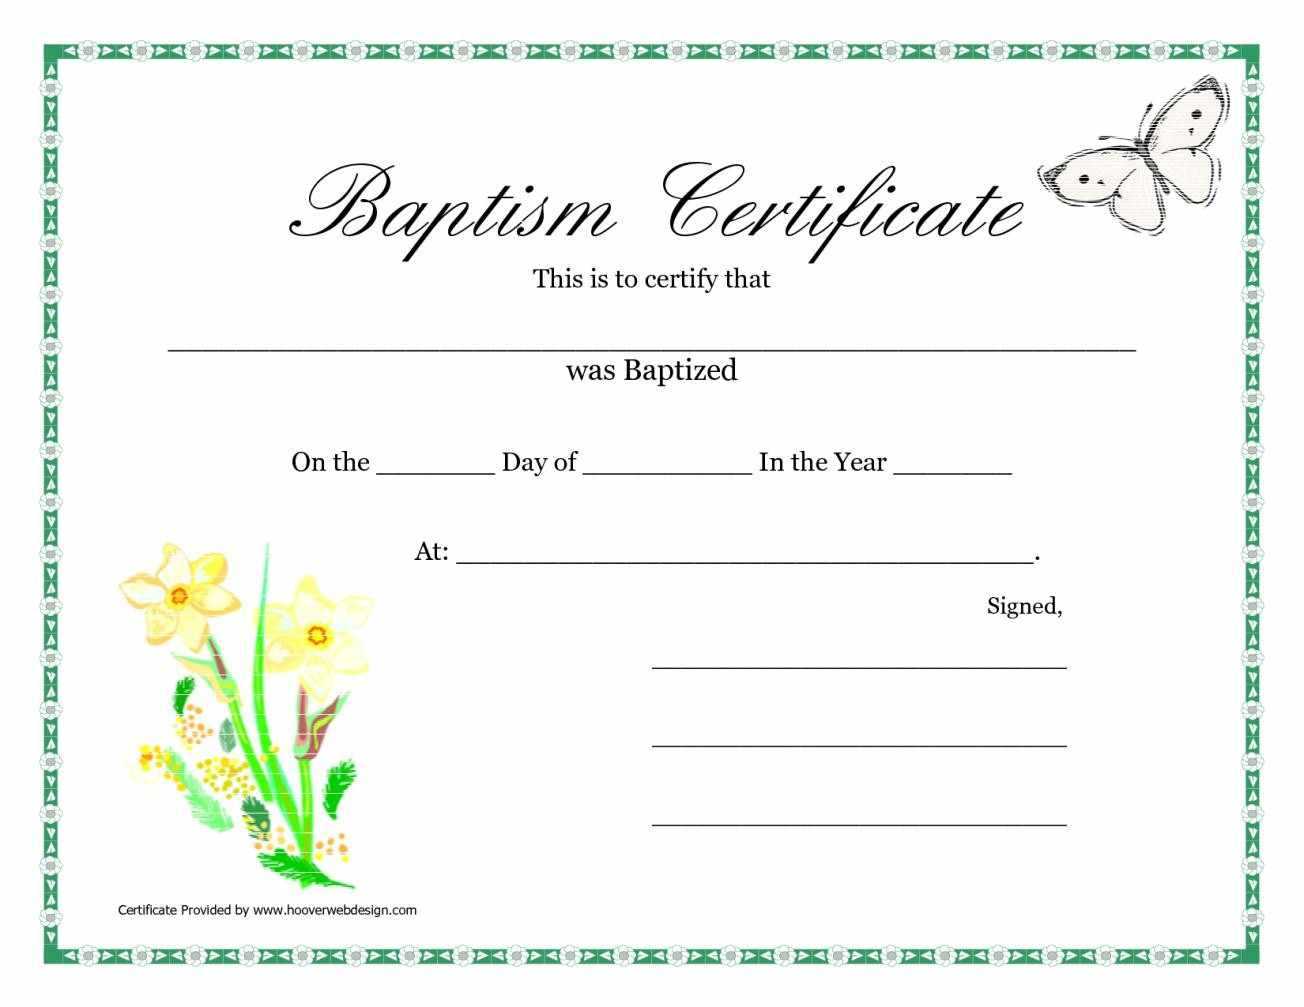 015 Template Ideas Certificate Of Baptism Unique Broadman Pertaining To Christian Baptism Certificate Template